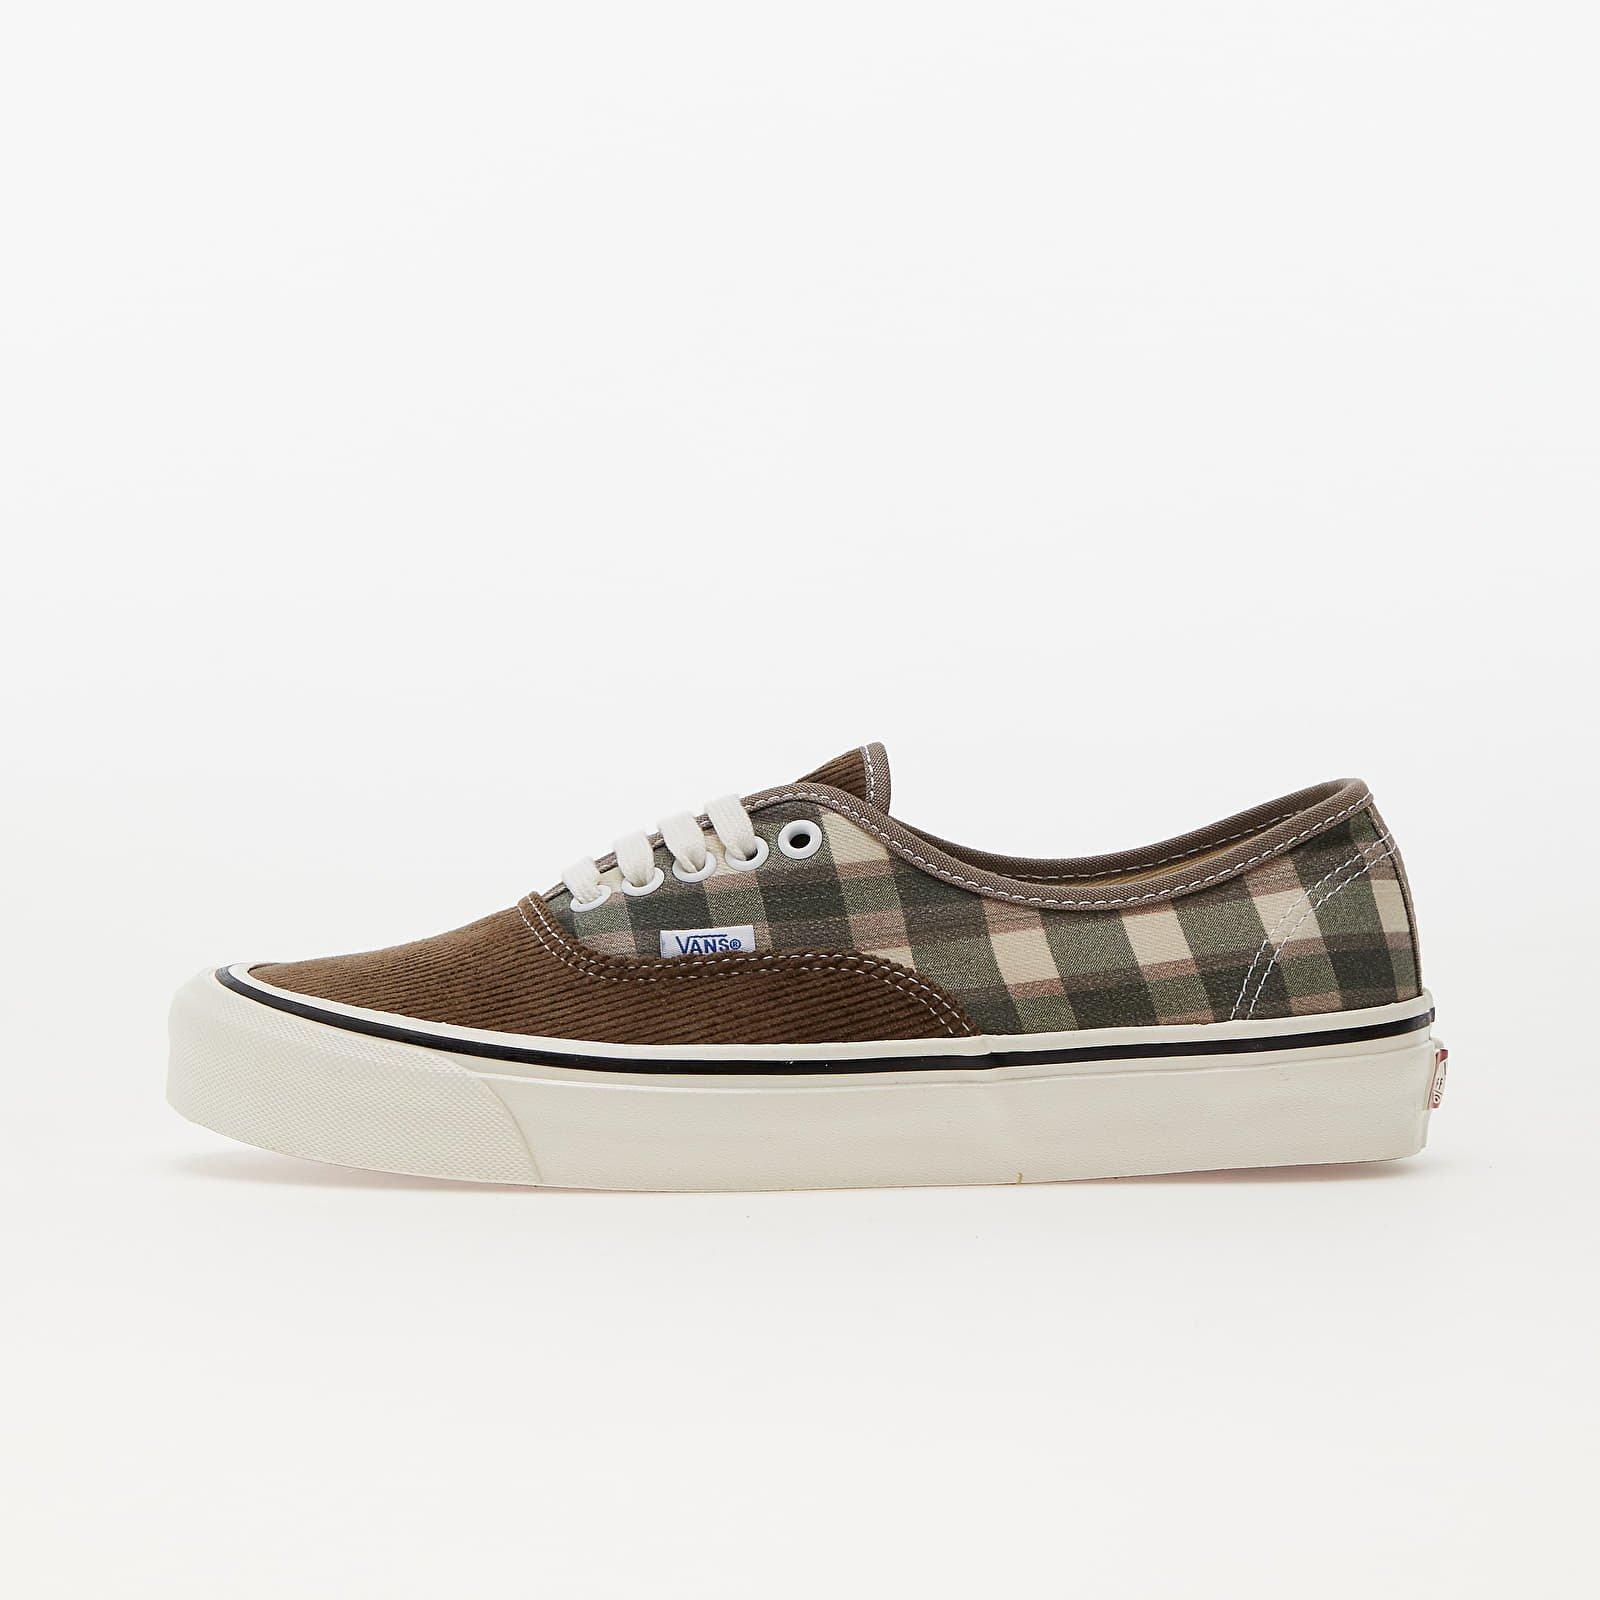 Vans Authentic 44 DX - Anaheim Factory in Black / White Check